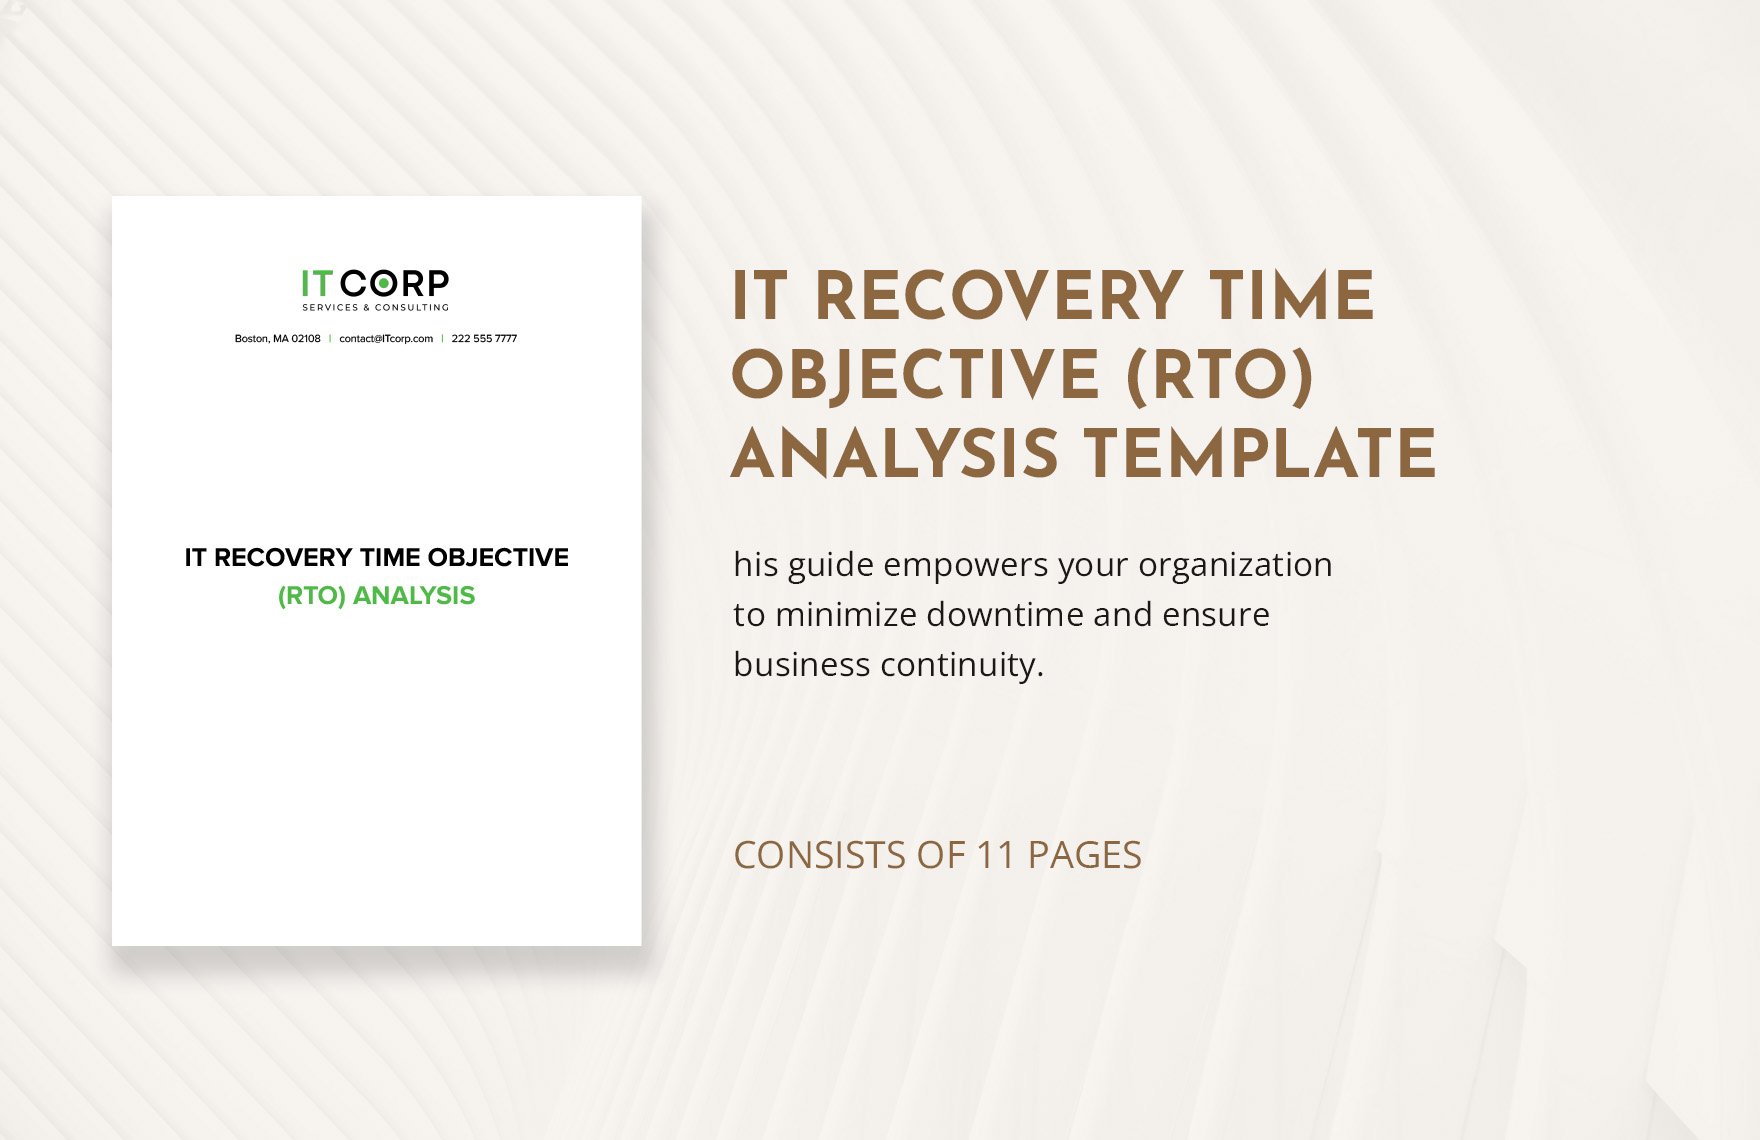 IT Recovery Time Objective (RTO) Analysis Template